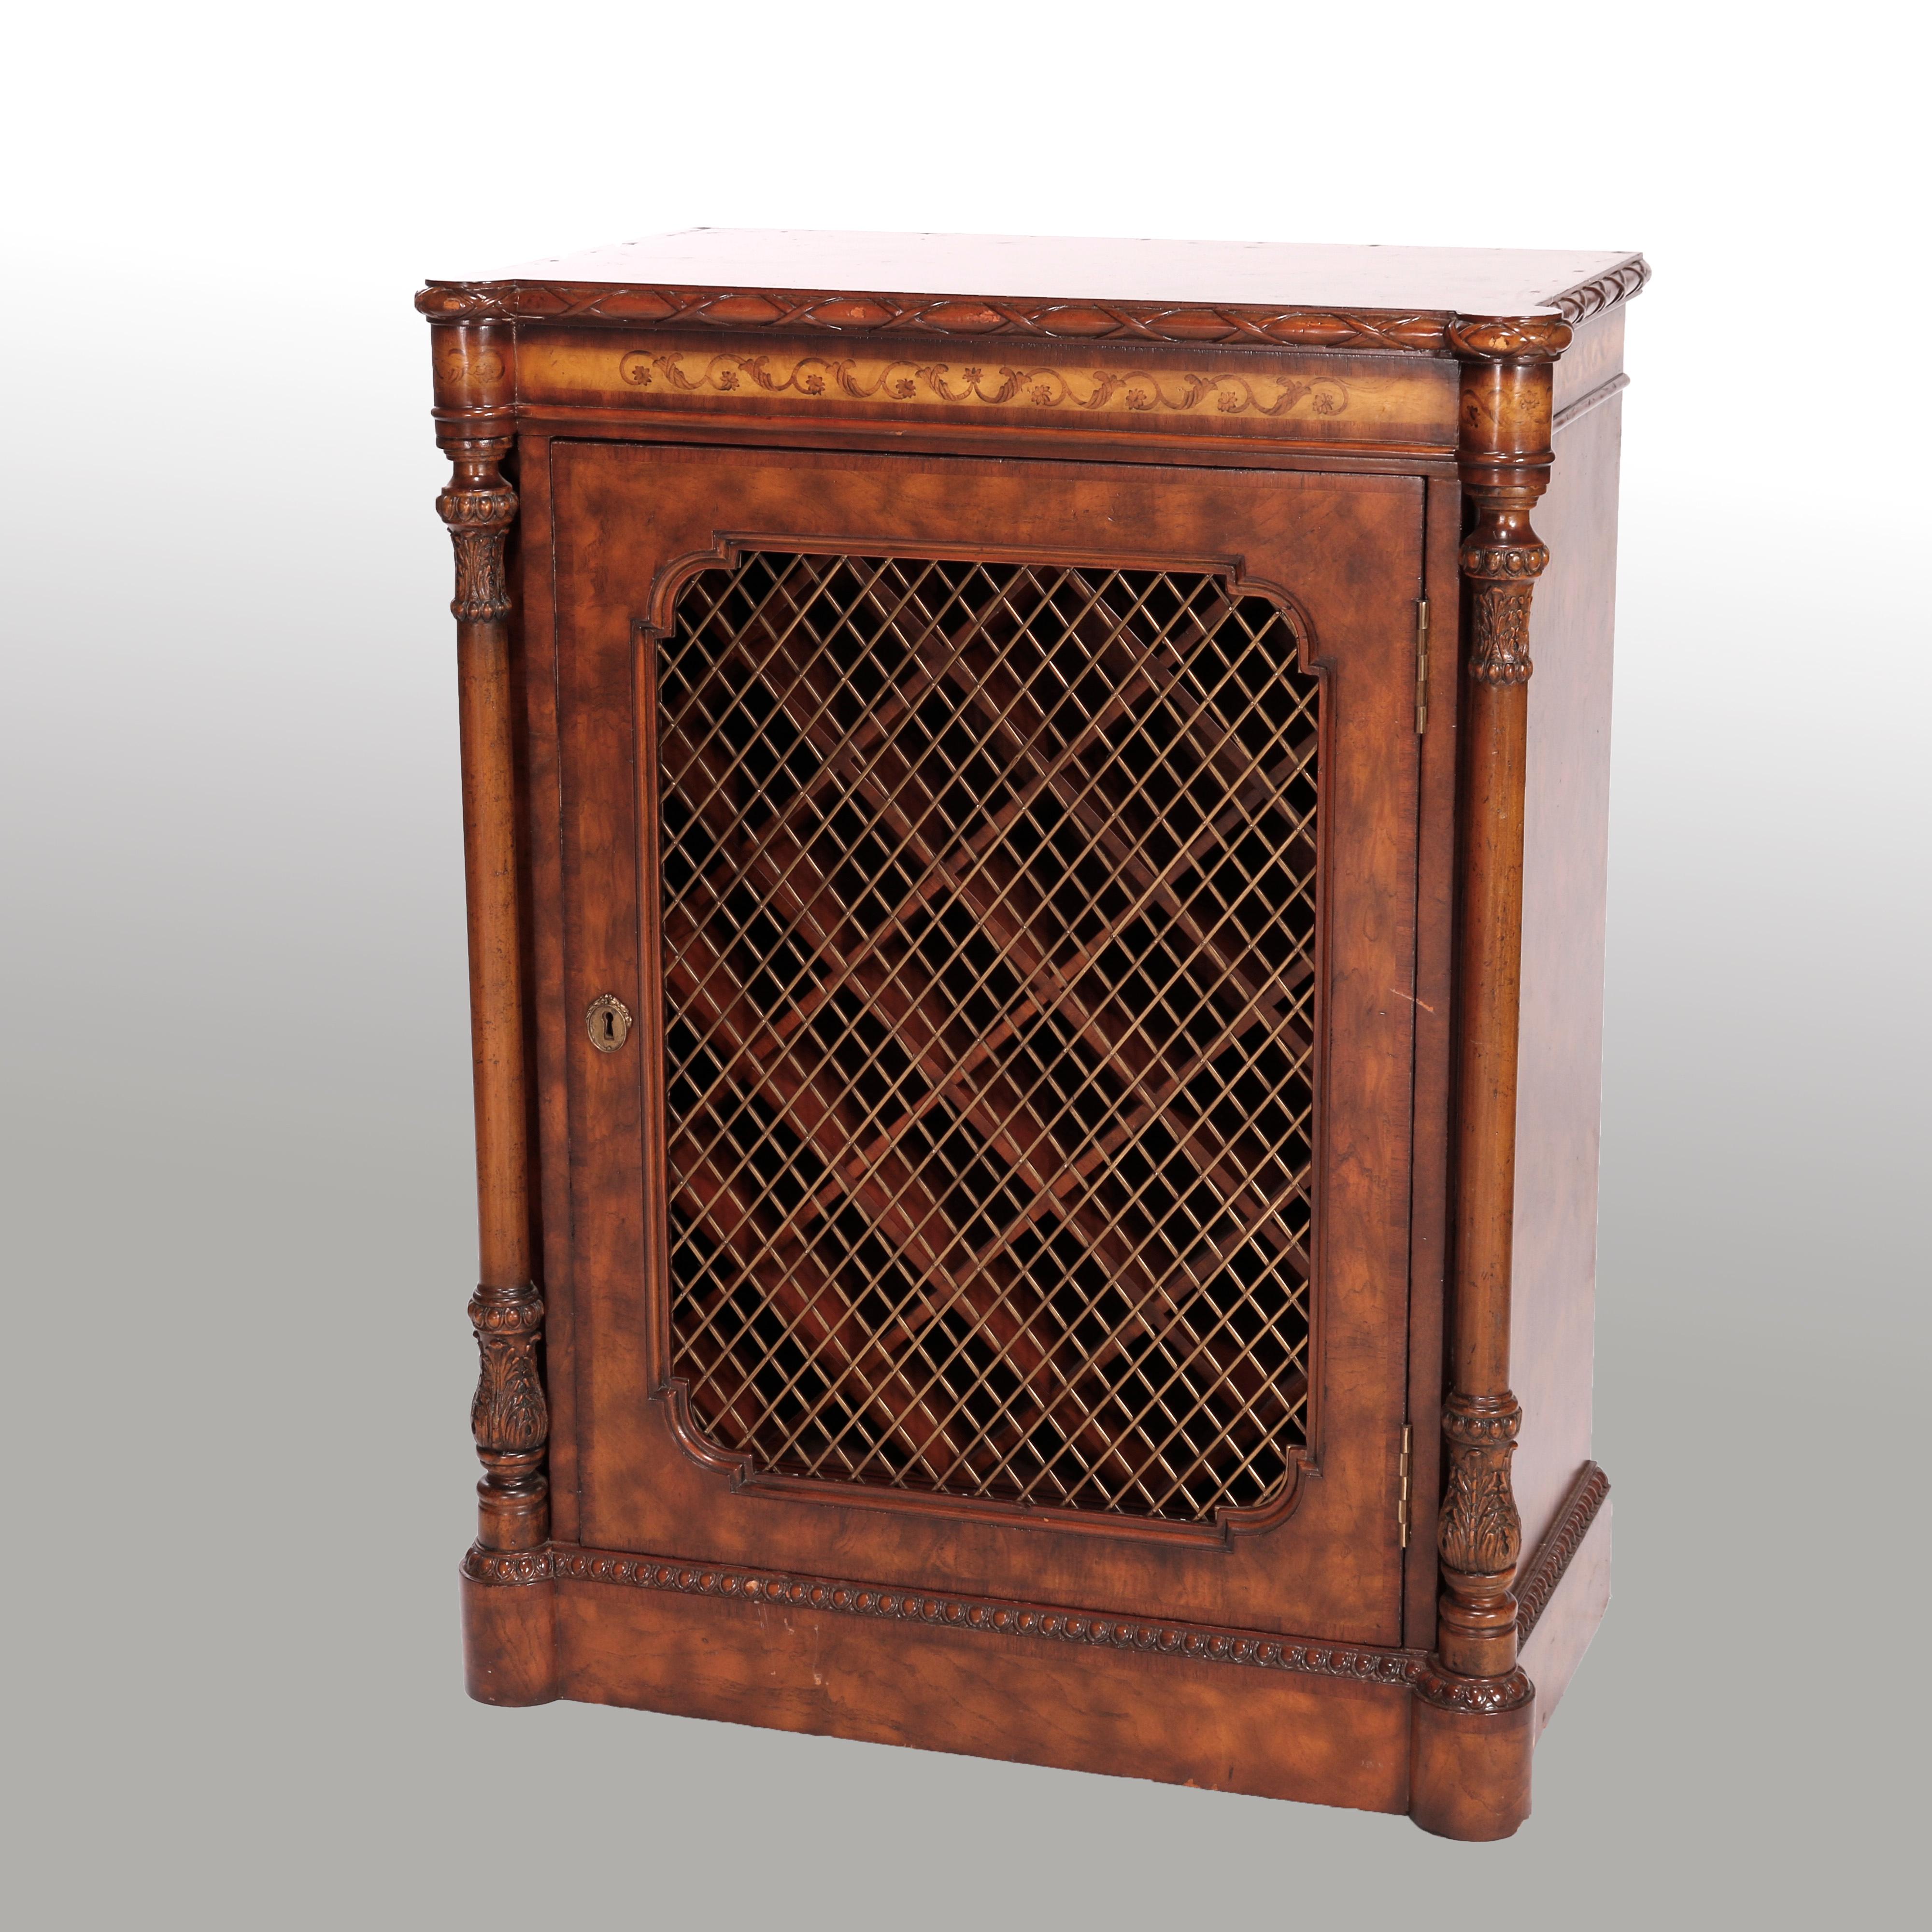 An American Classical style wine cask by Maitland Smith offers burl construction with shaped and beveled top over cabinet with single mesh-front door opening to bottle rack and flanked by Greek column supports, maker label as photographed, 20th